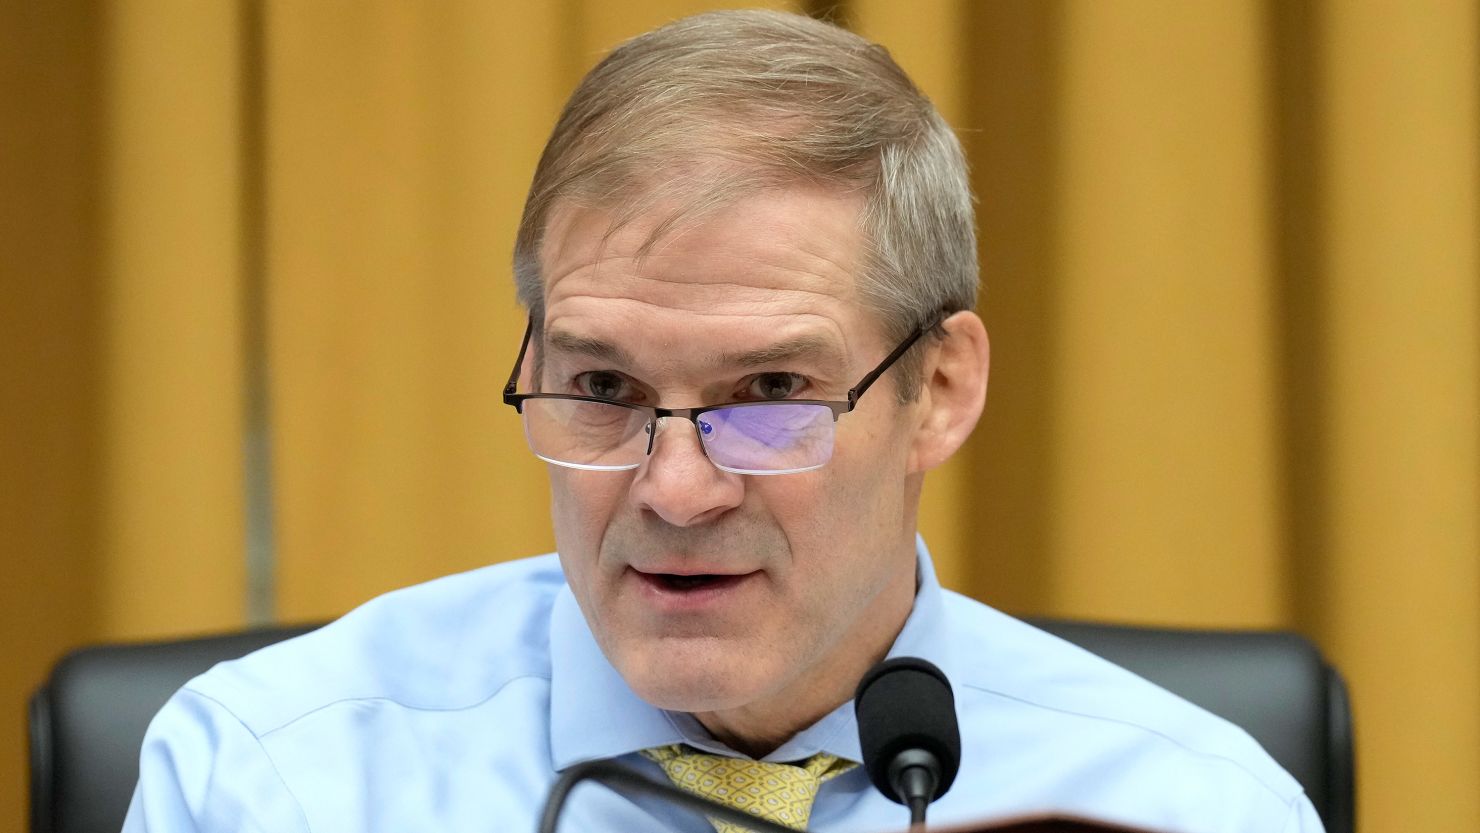 Rep. Jim Jordan (R-OH), Chairman of the House Judiciary Committee, delivers remarks on Capitol Hill, February 01, 2023 in Washington, DC. 